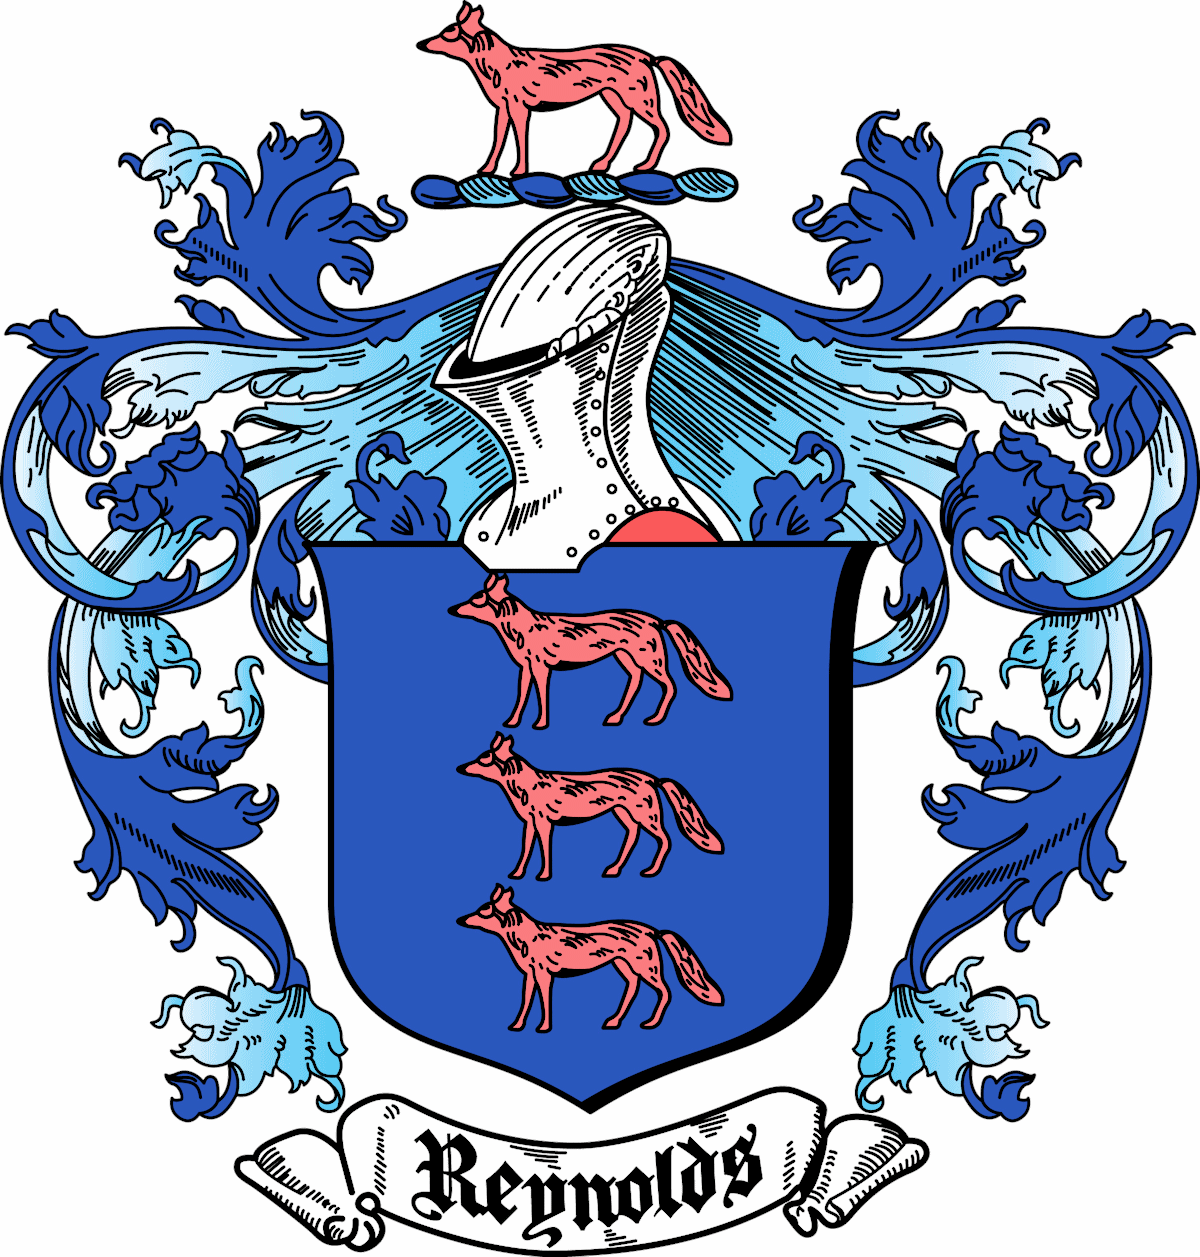 Reynolds Family Association Crest or Coat of Arms